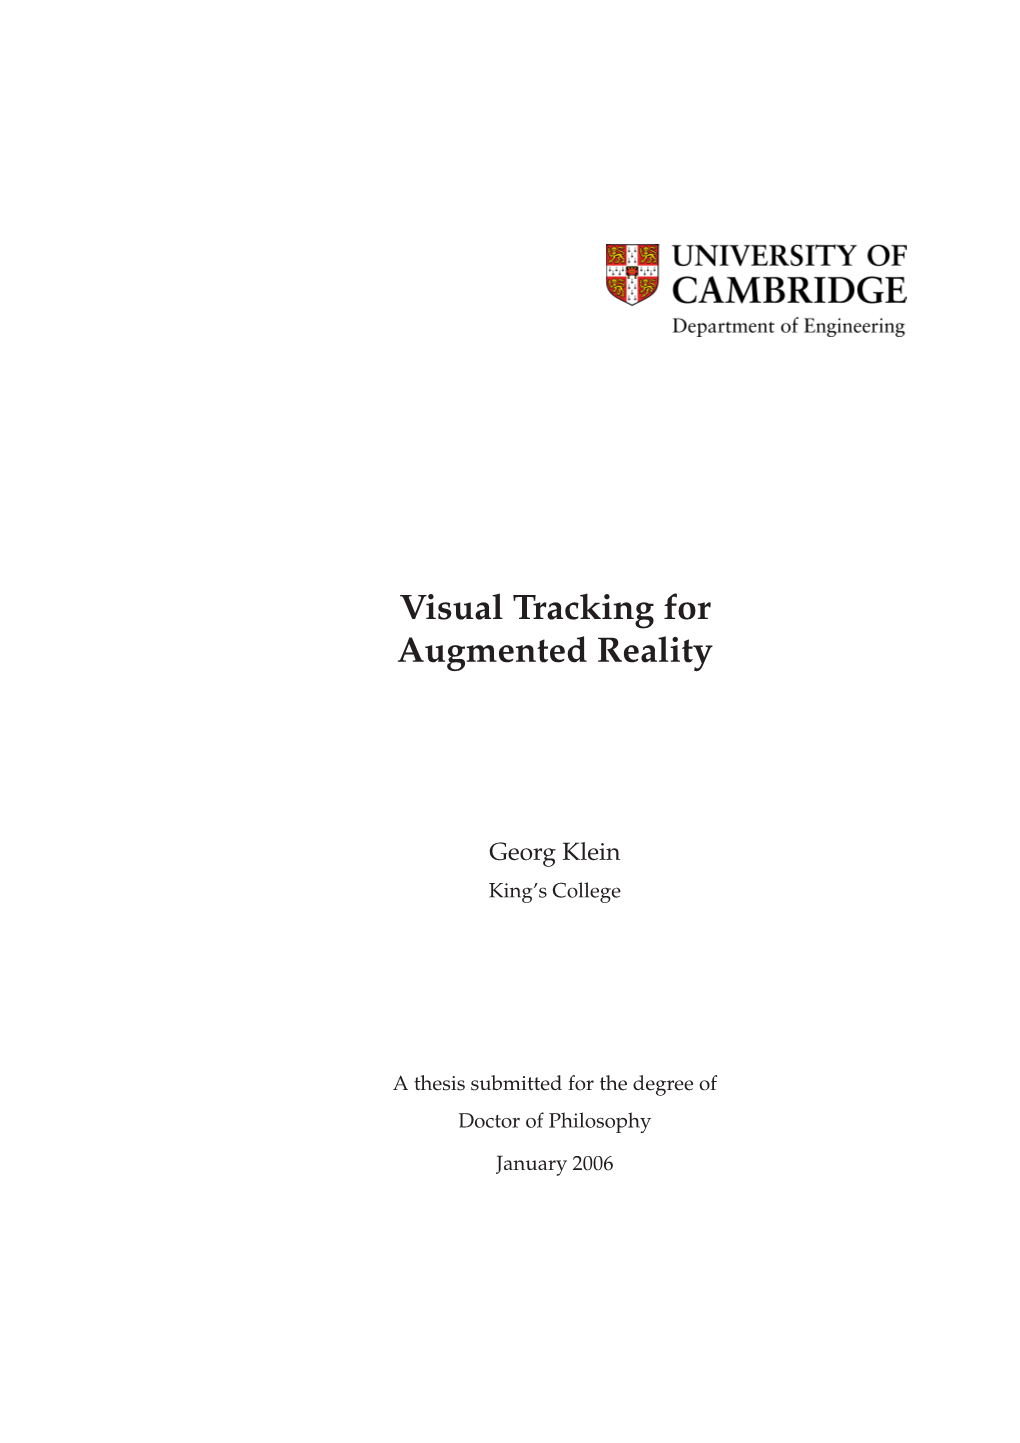 Visual Tracking for Augmented Reality